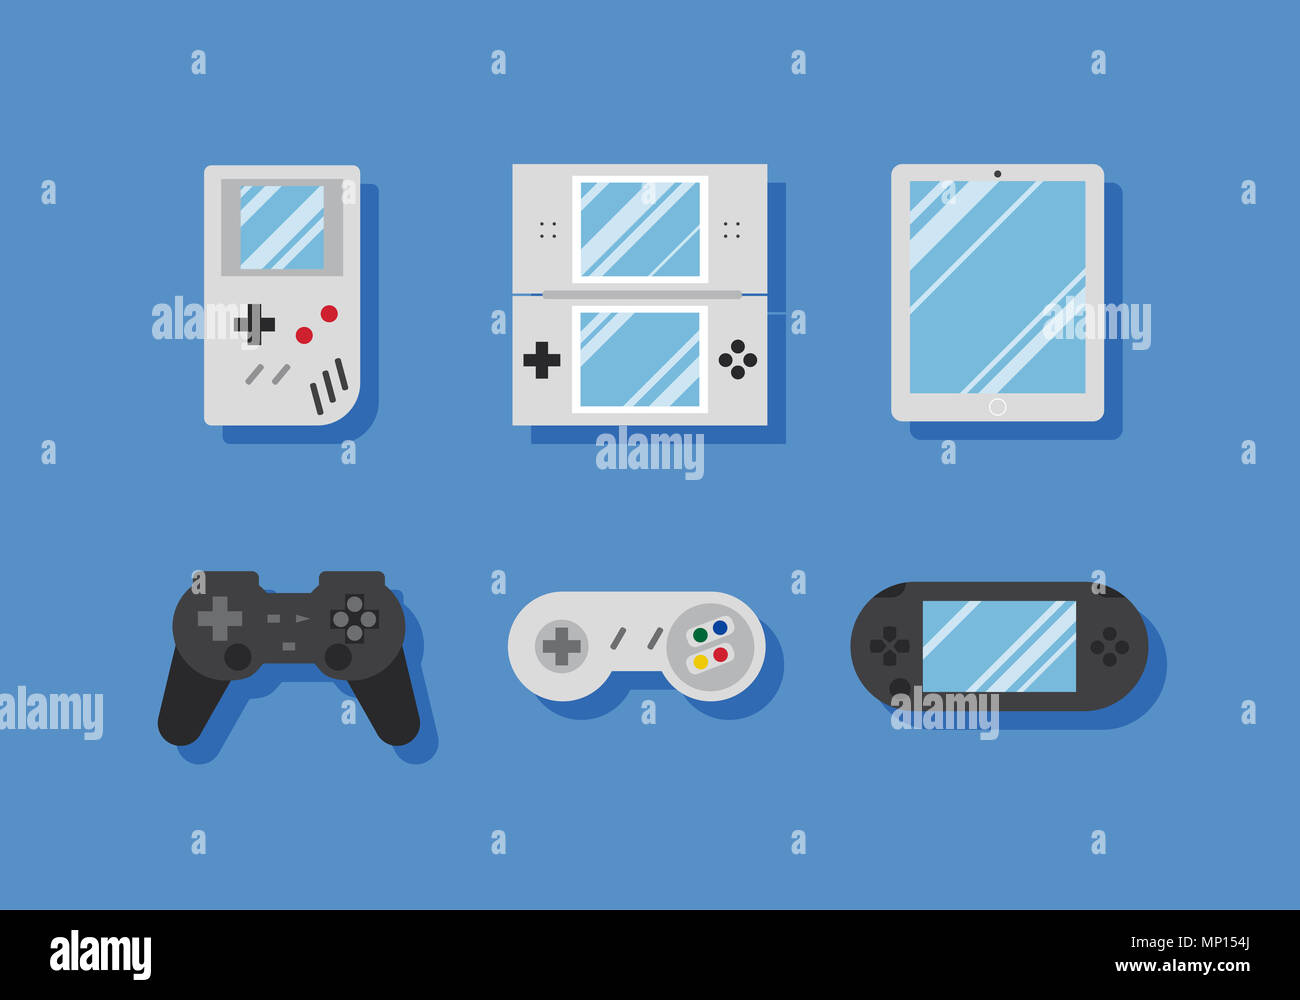 Illustration of Game controllers. Stock Photo